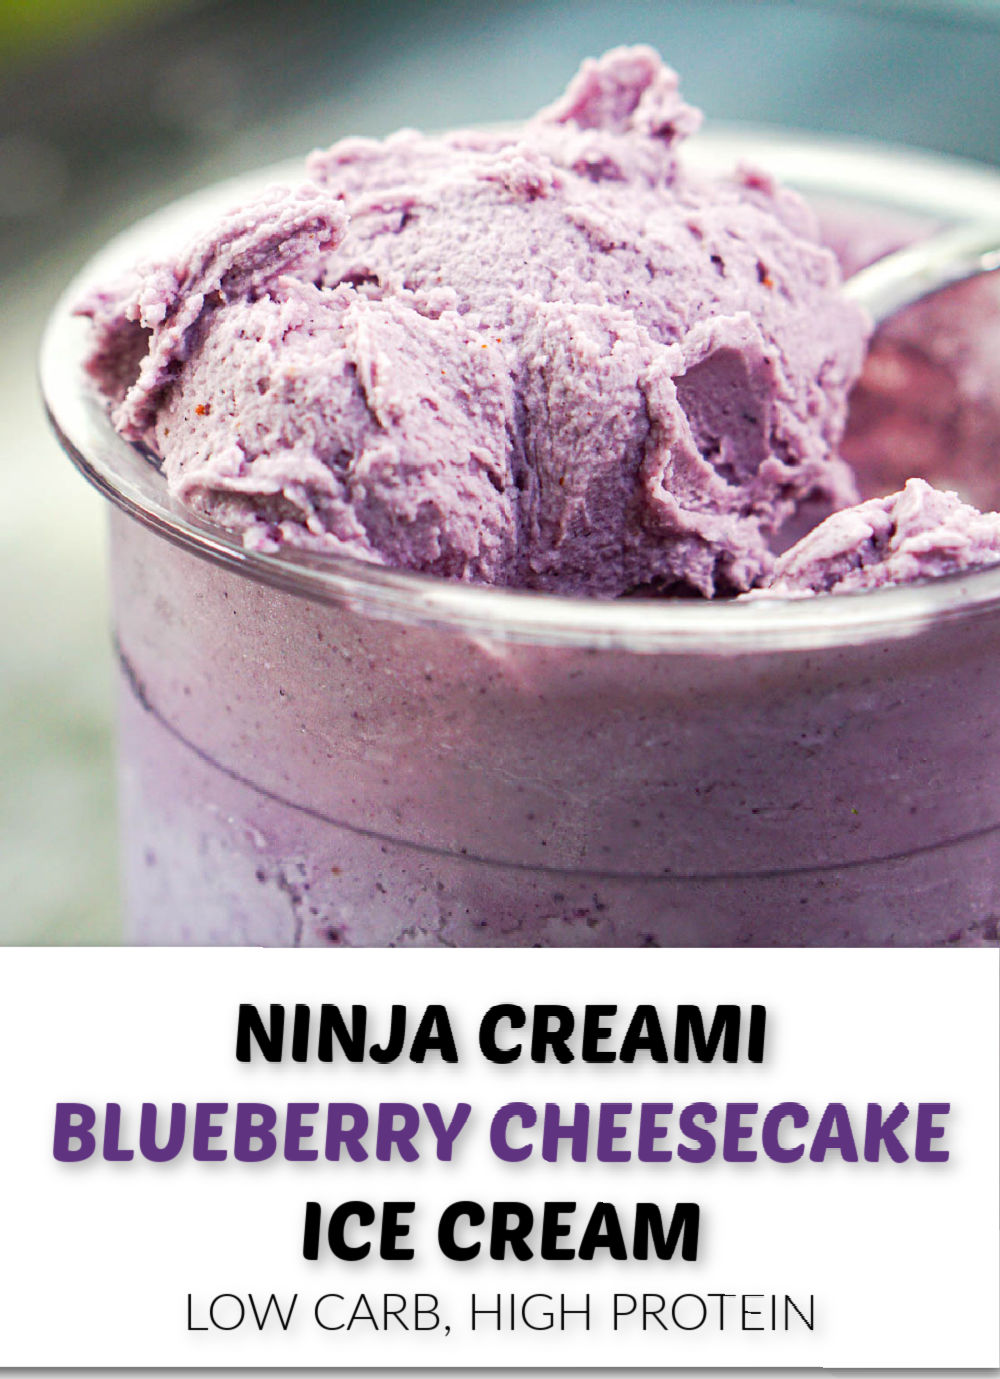  a pint container with blueberry cheesecake ice cream made in Ninja Creami with text